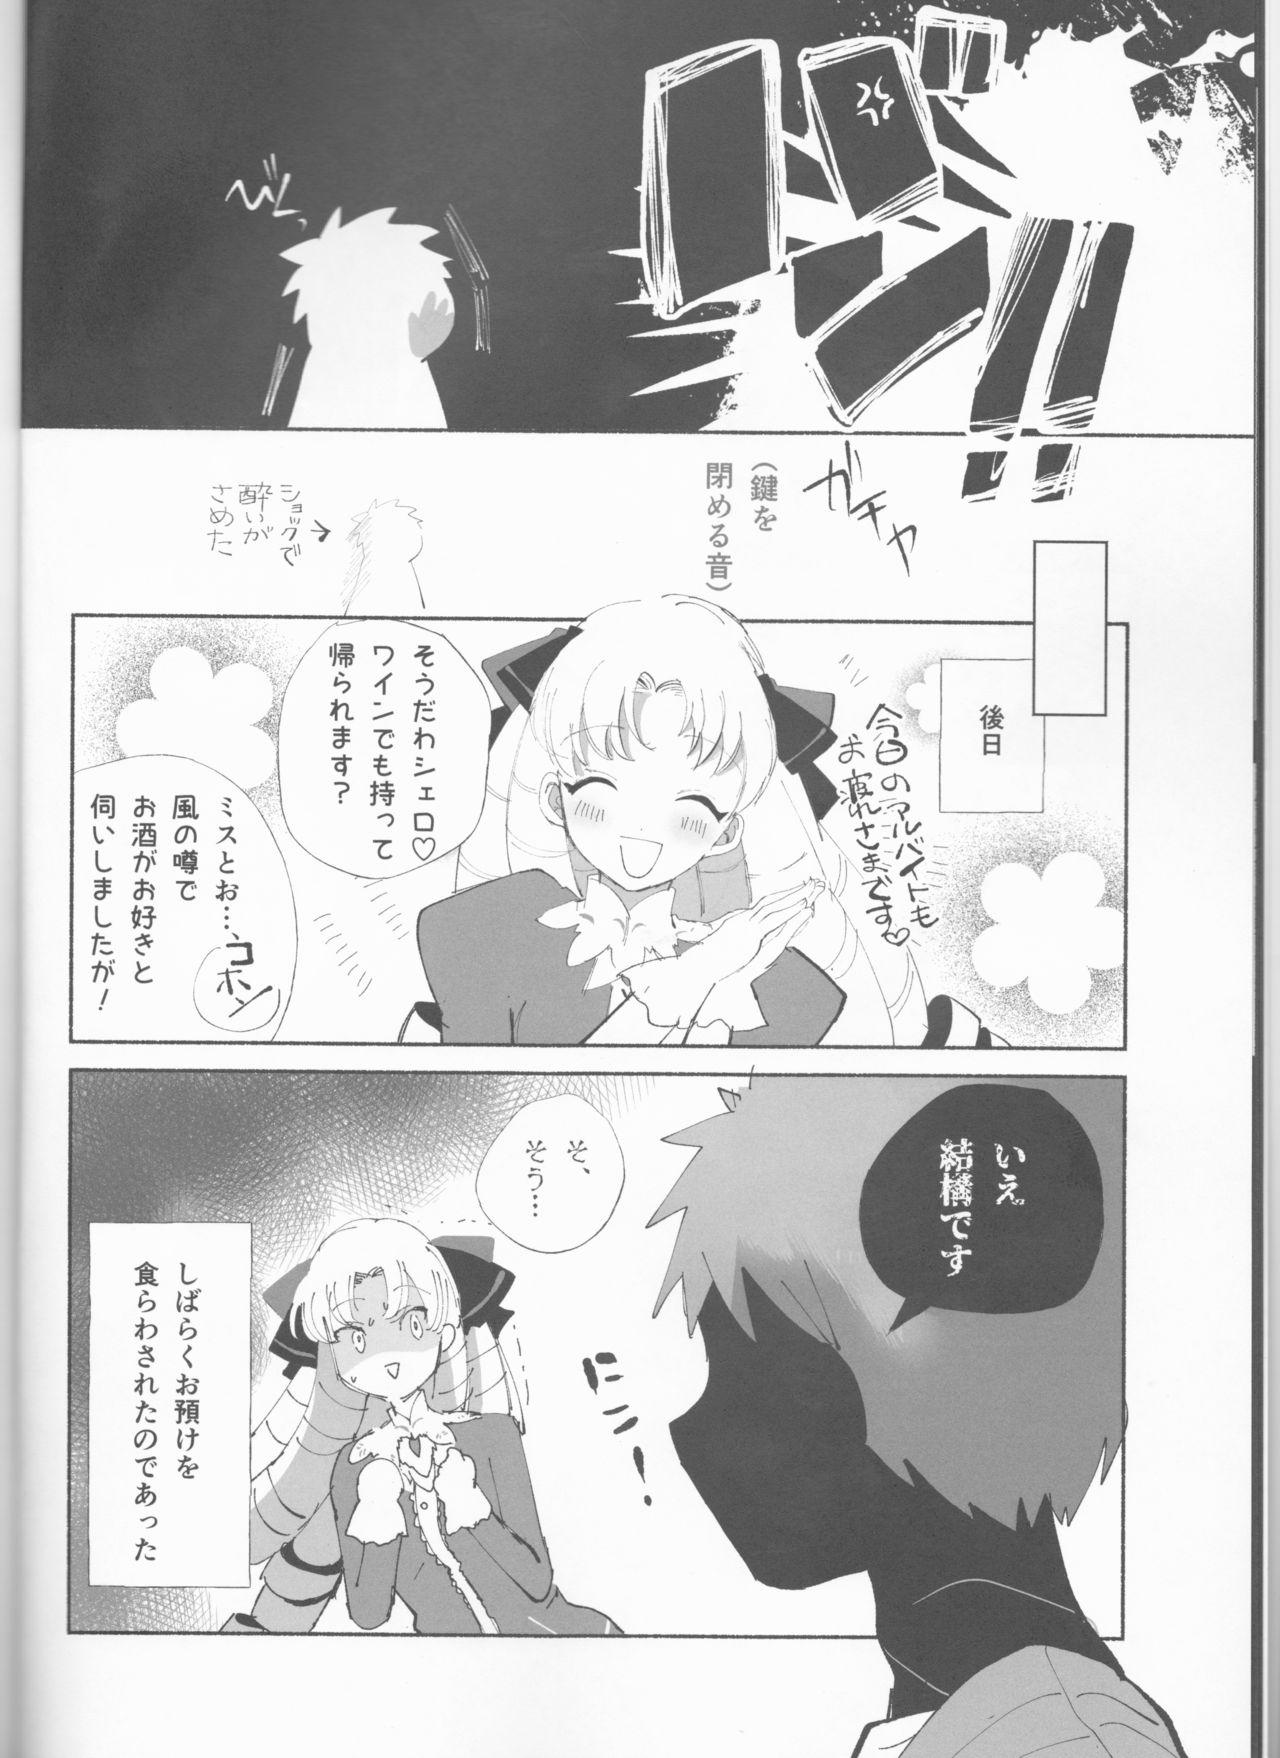 Amateur Porno TRAUMEREI(Fate/stay night] - Fate stay night Hardsex - Page 9